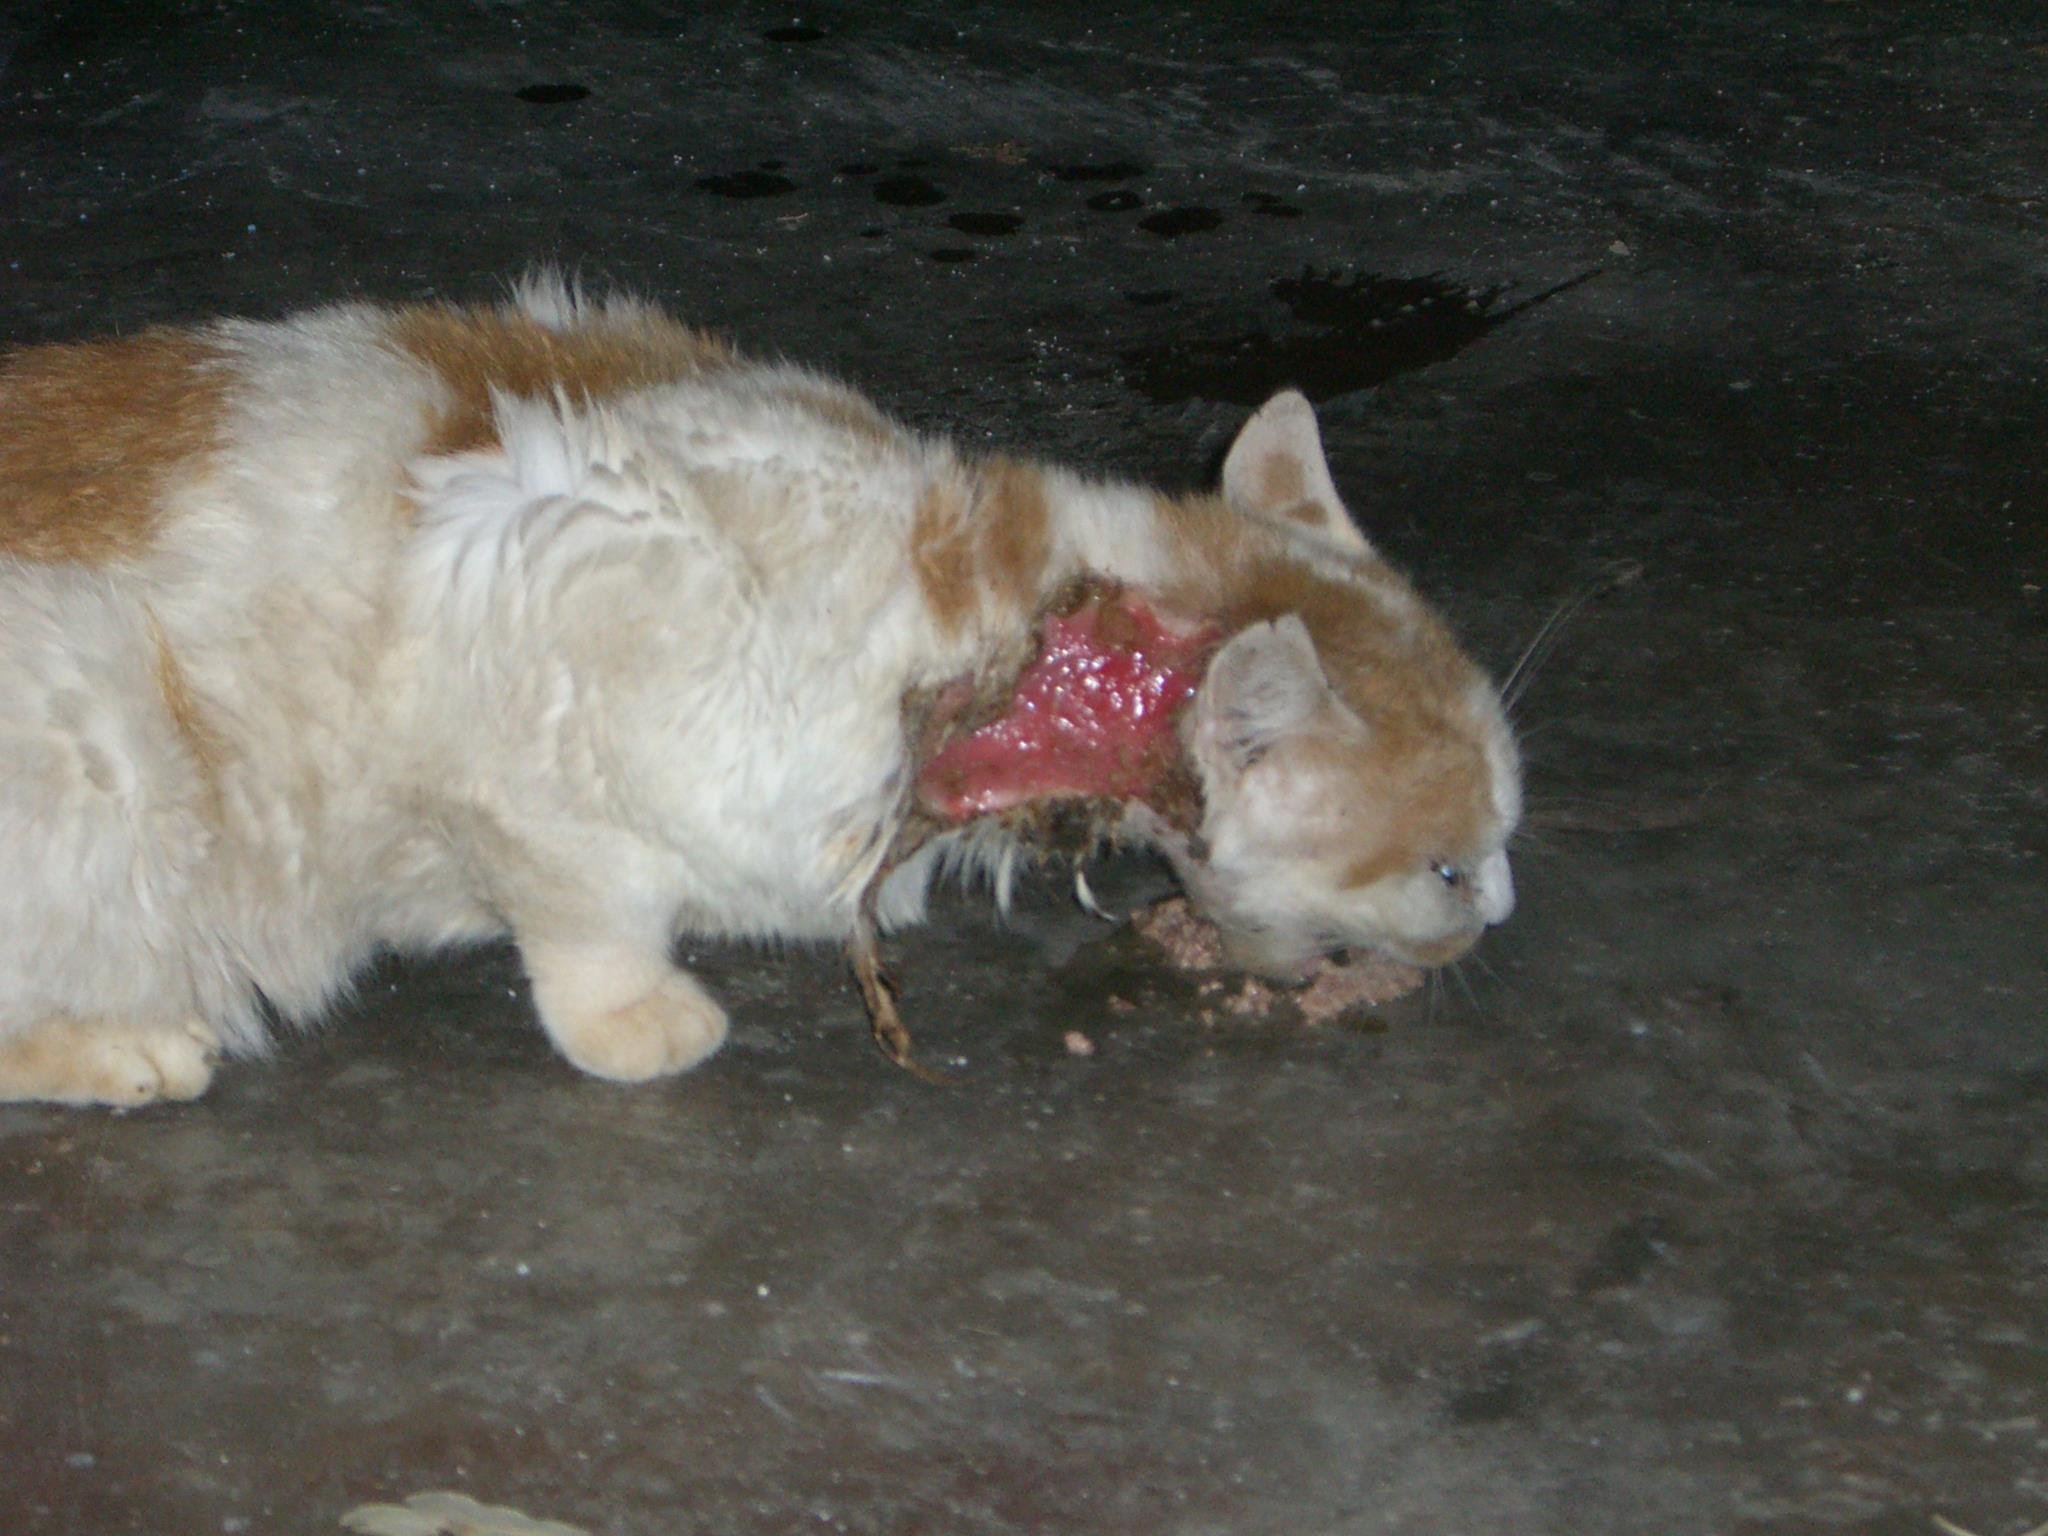 Saving A Stray Cat with abscess - YouTube